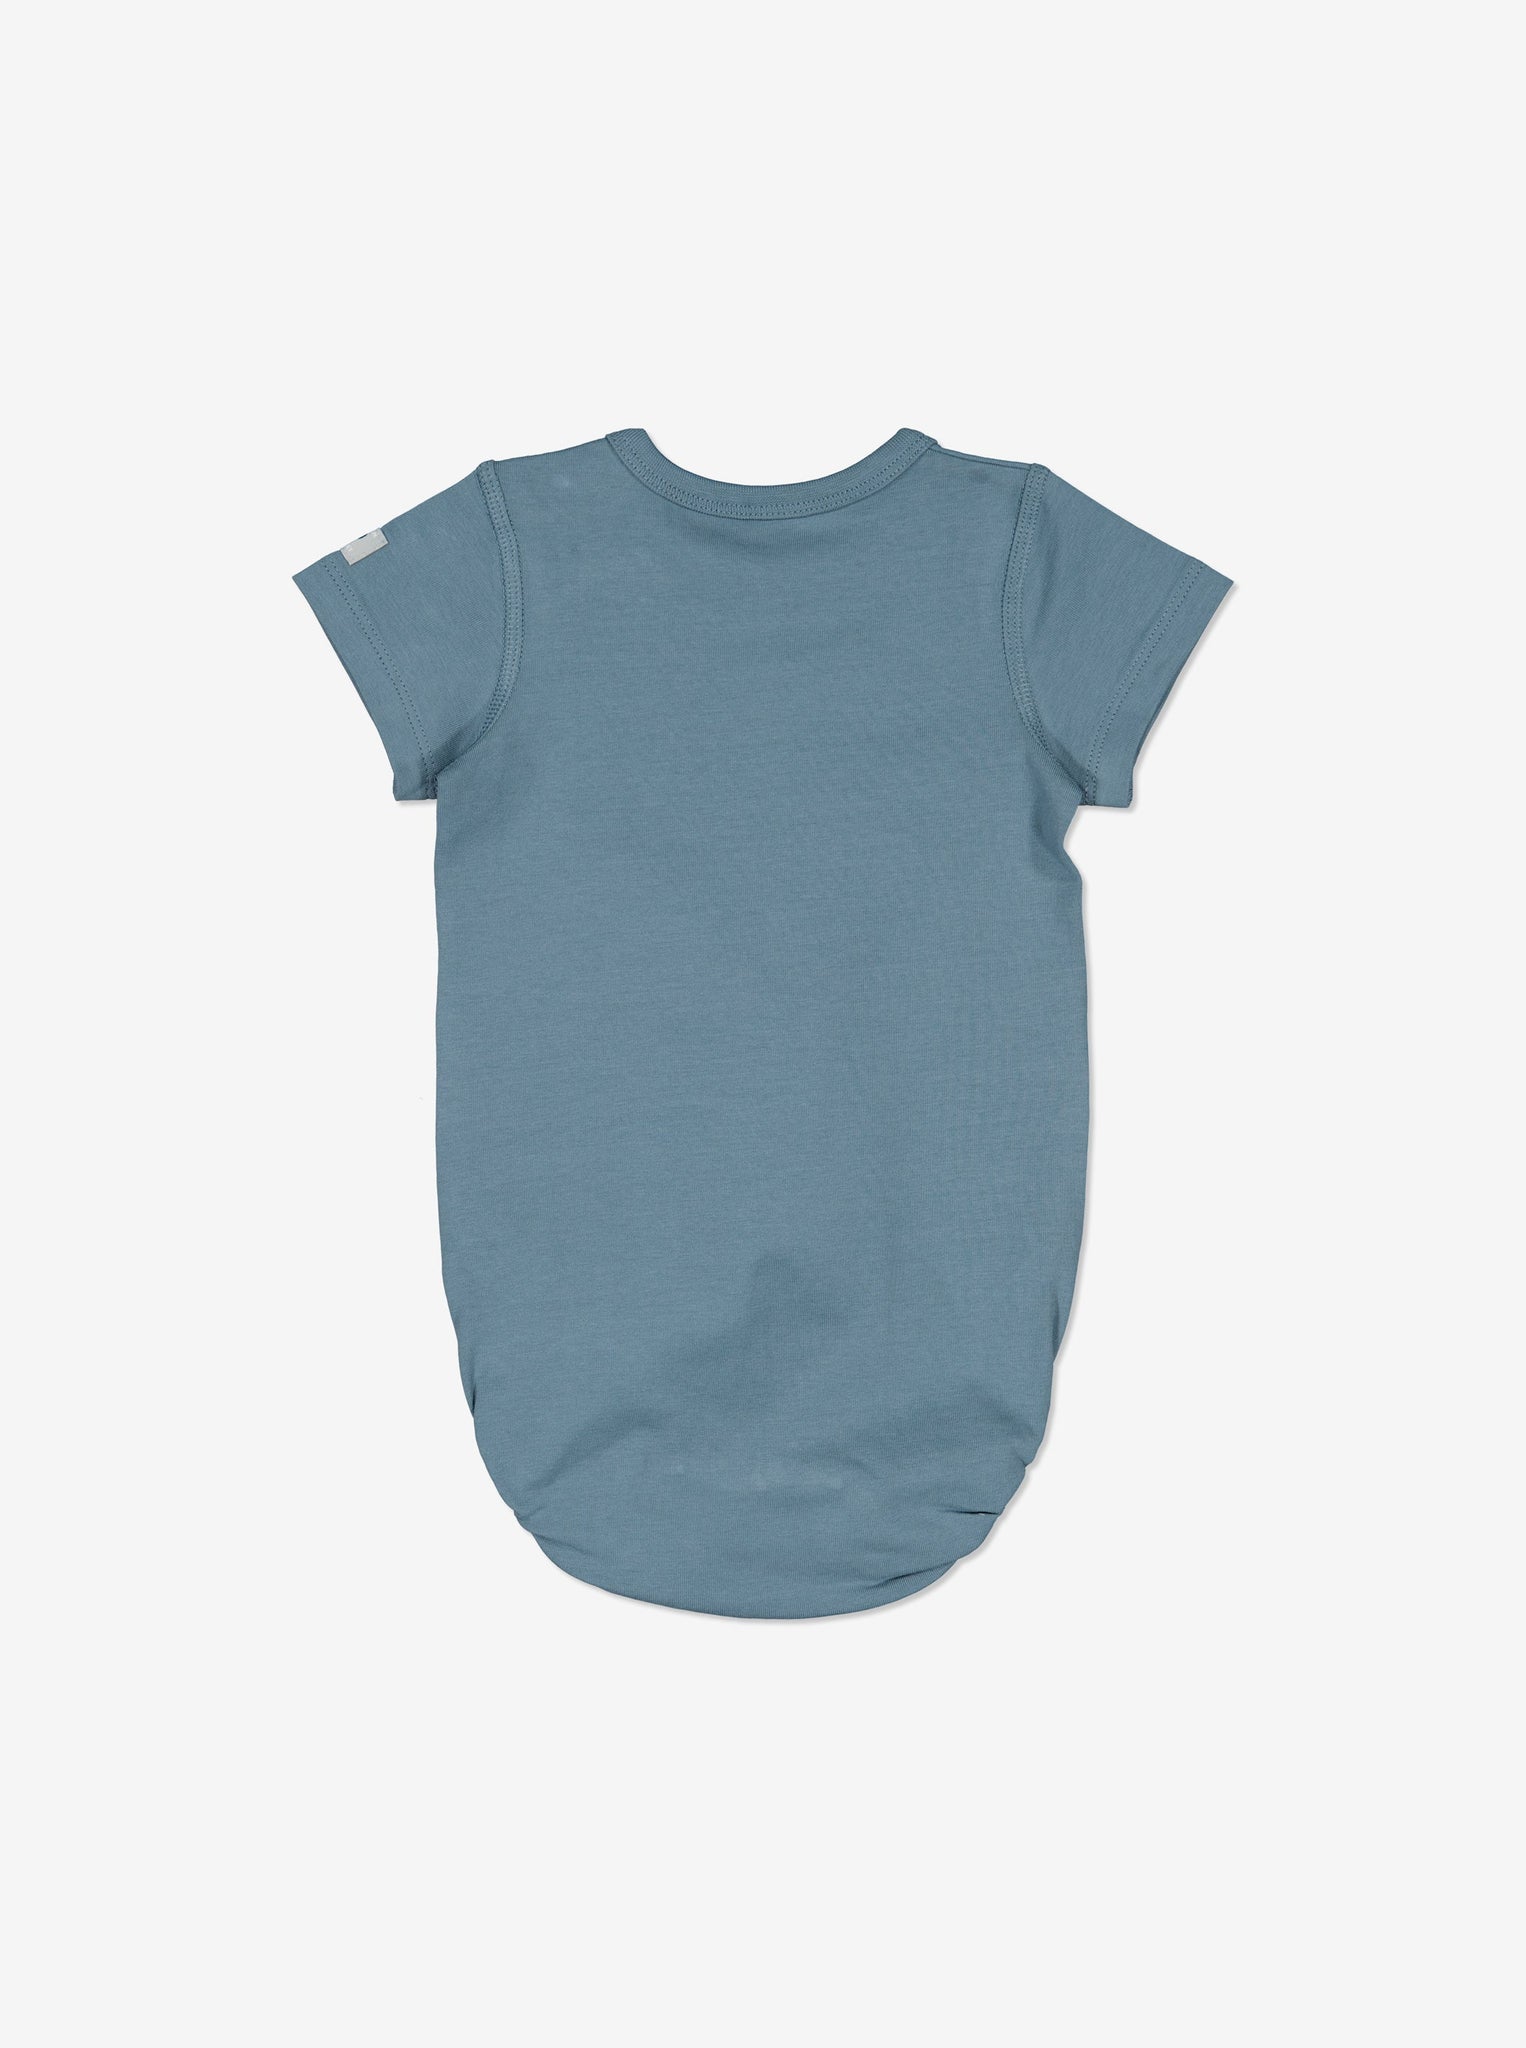 Balloon Print Blue Newborn Babygrow from Polarn O. Pyret Kidswear. Made from ethically sourced materials.